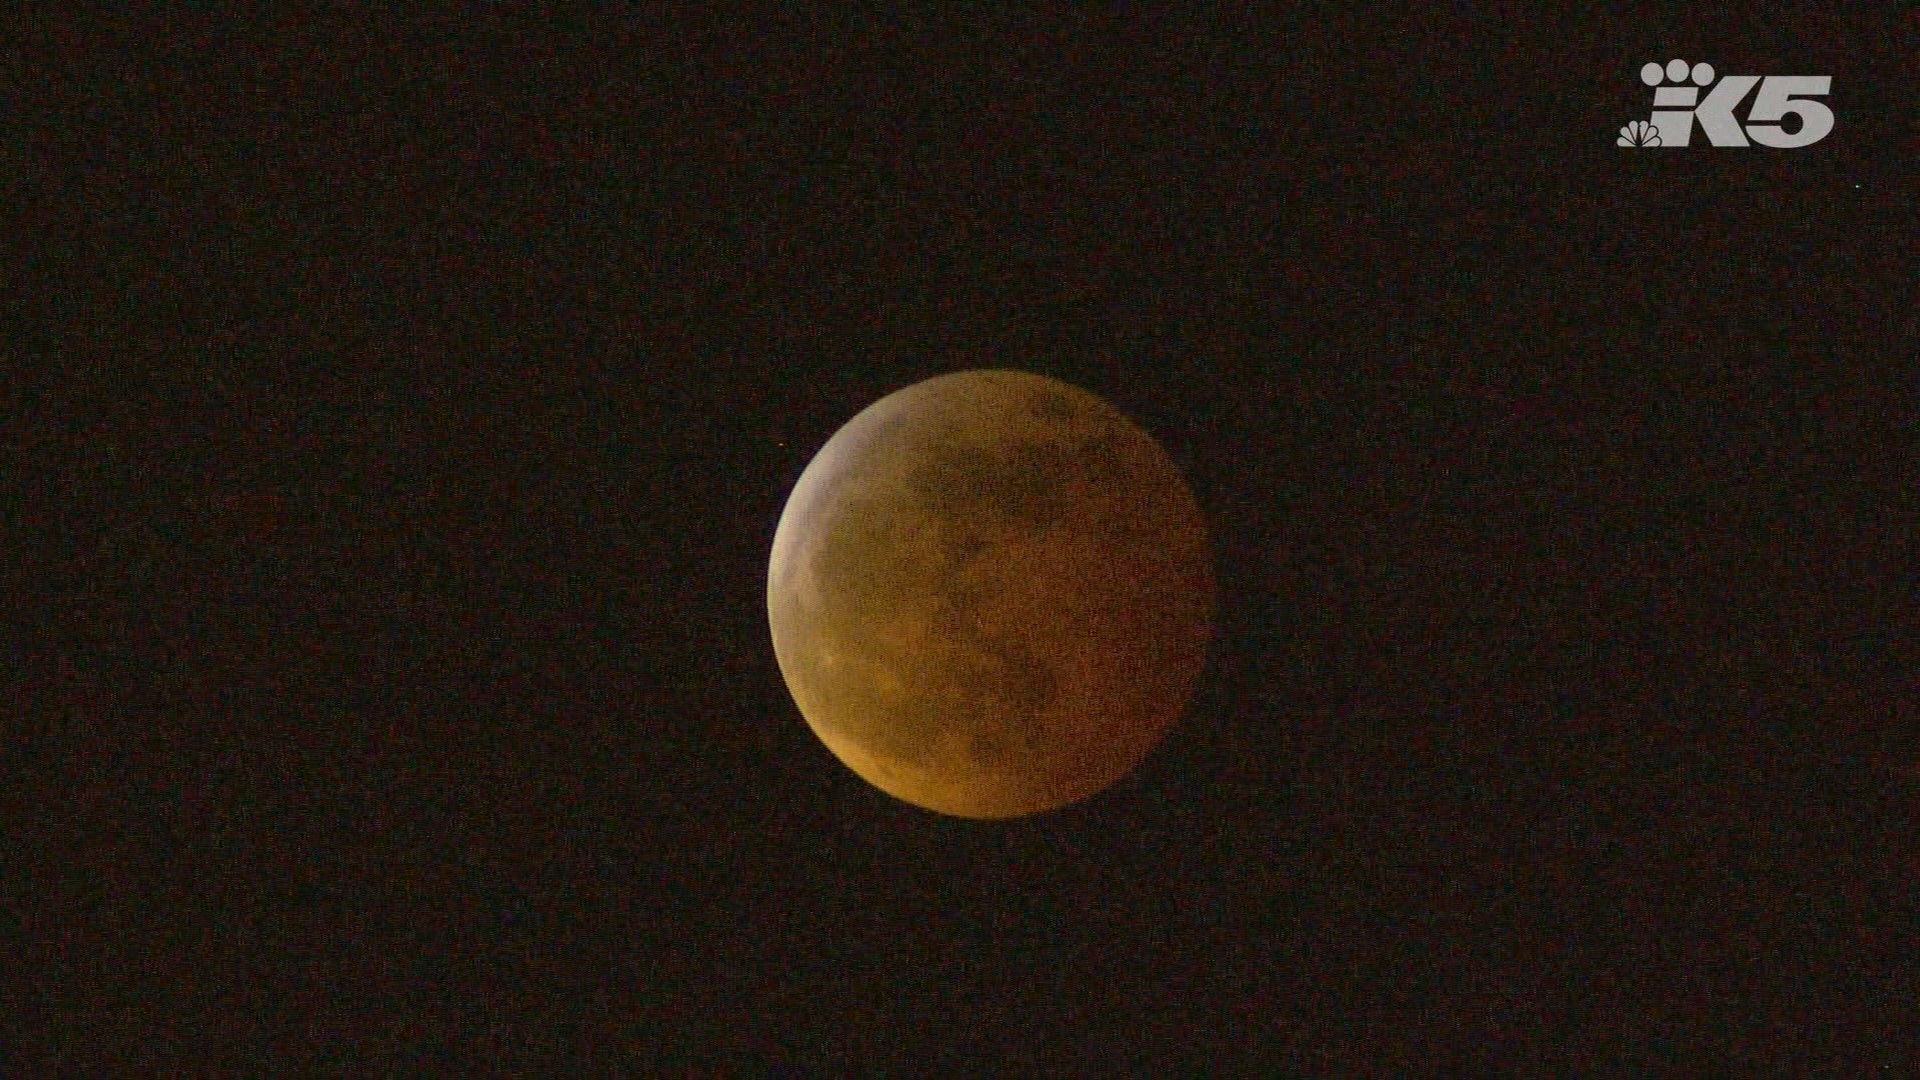 Watch a timelapse of the lunar eclipse super blood wolf moon as it forms over the night sky